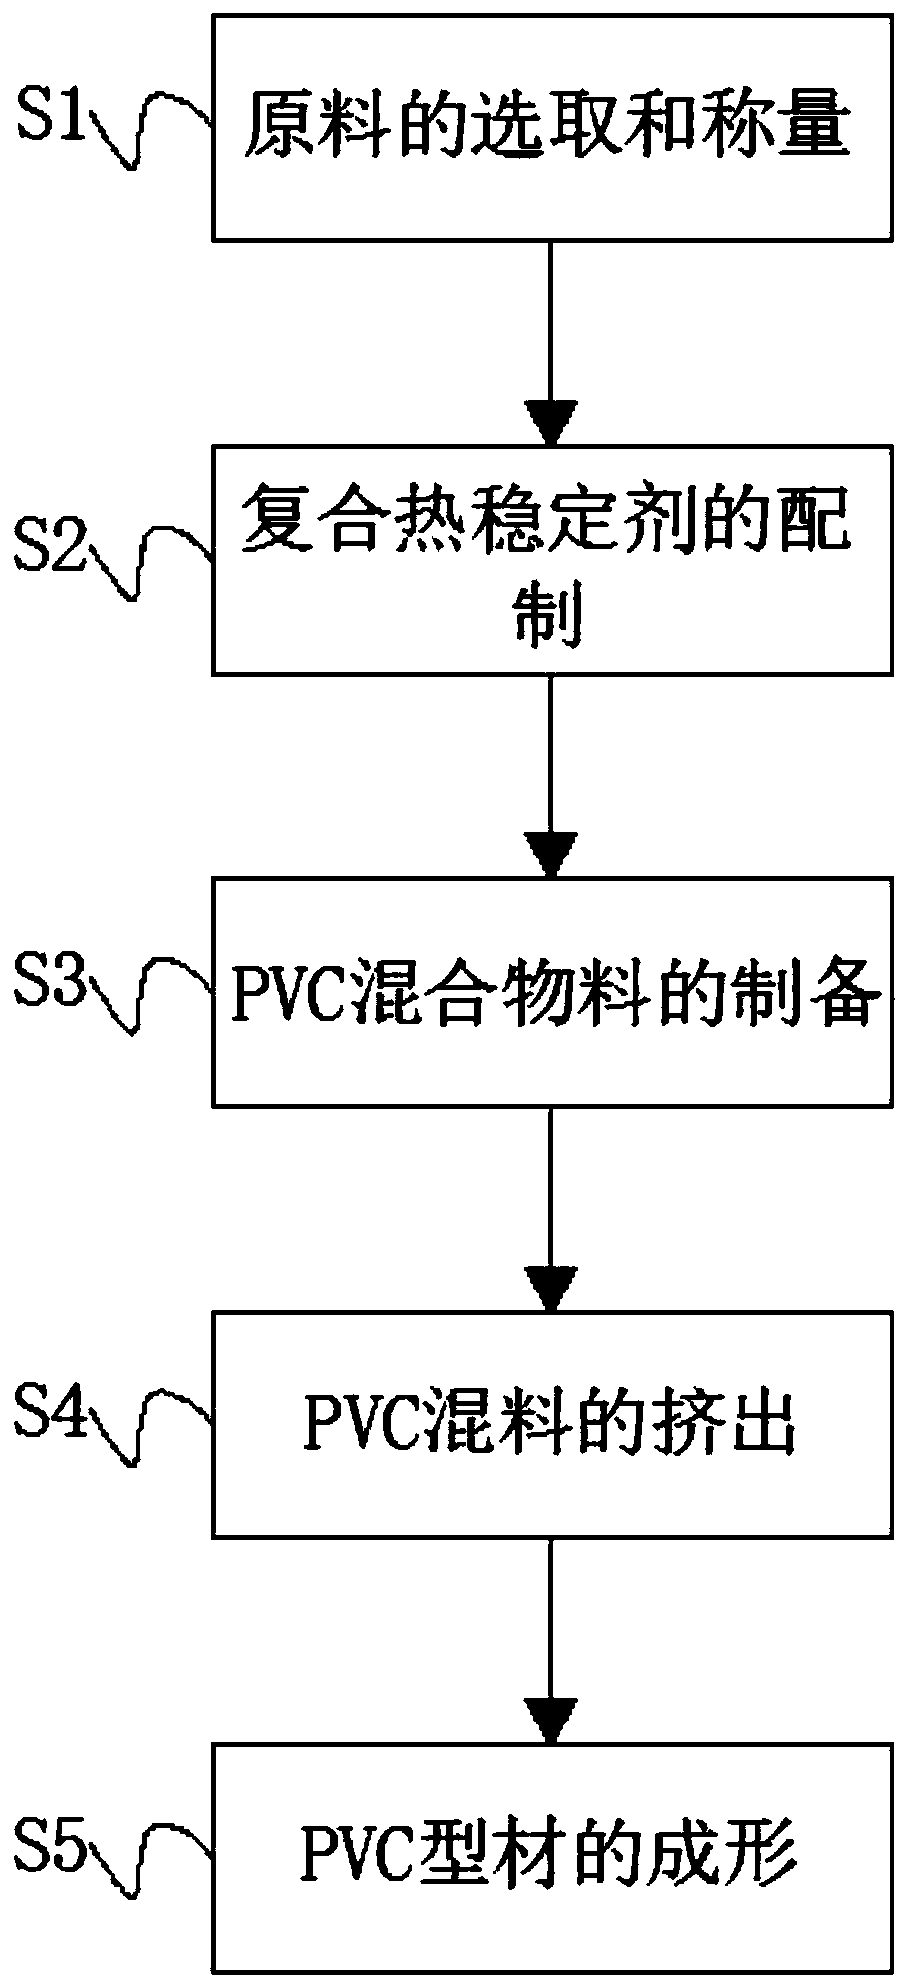 Lead-removal nontoxic environment-friendly PVC (polyvinyl chloride) profile raw material formula and preparation method